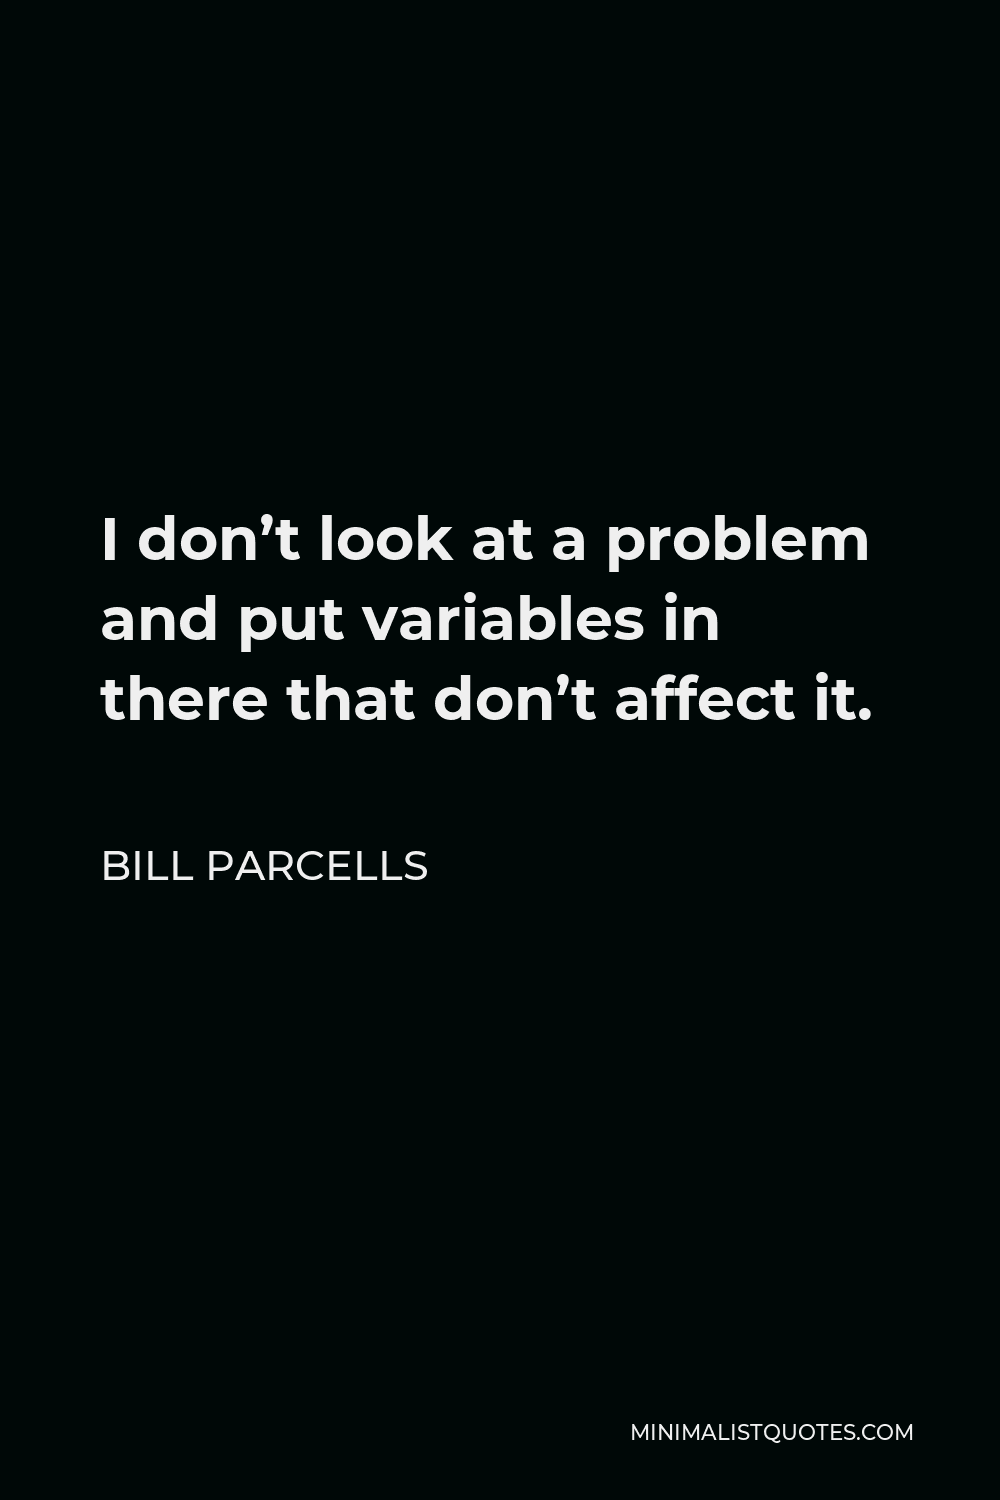 Bill Parcells Quote - I don’t look at a problem and put variables in there that don’t affect it.